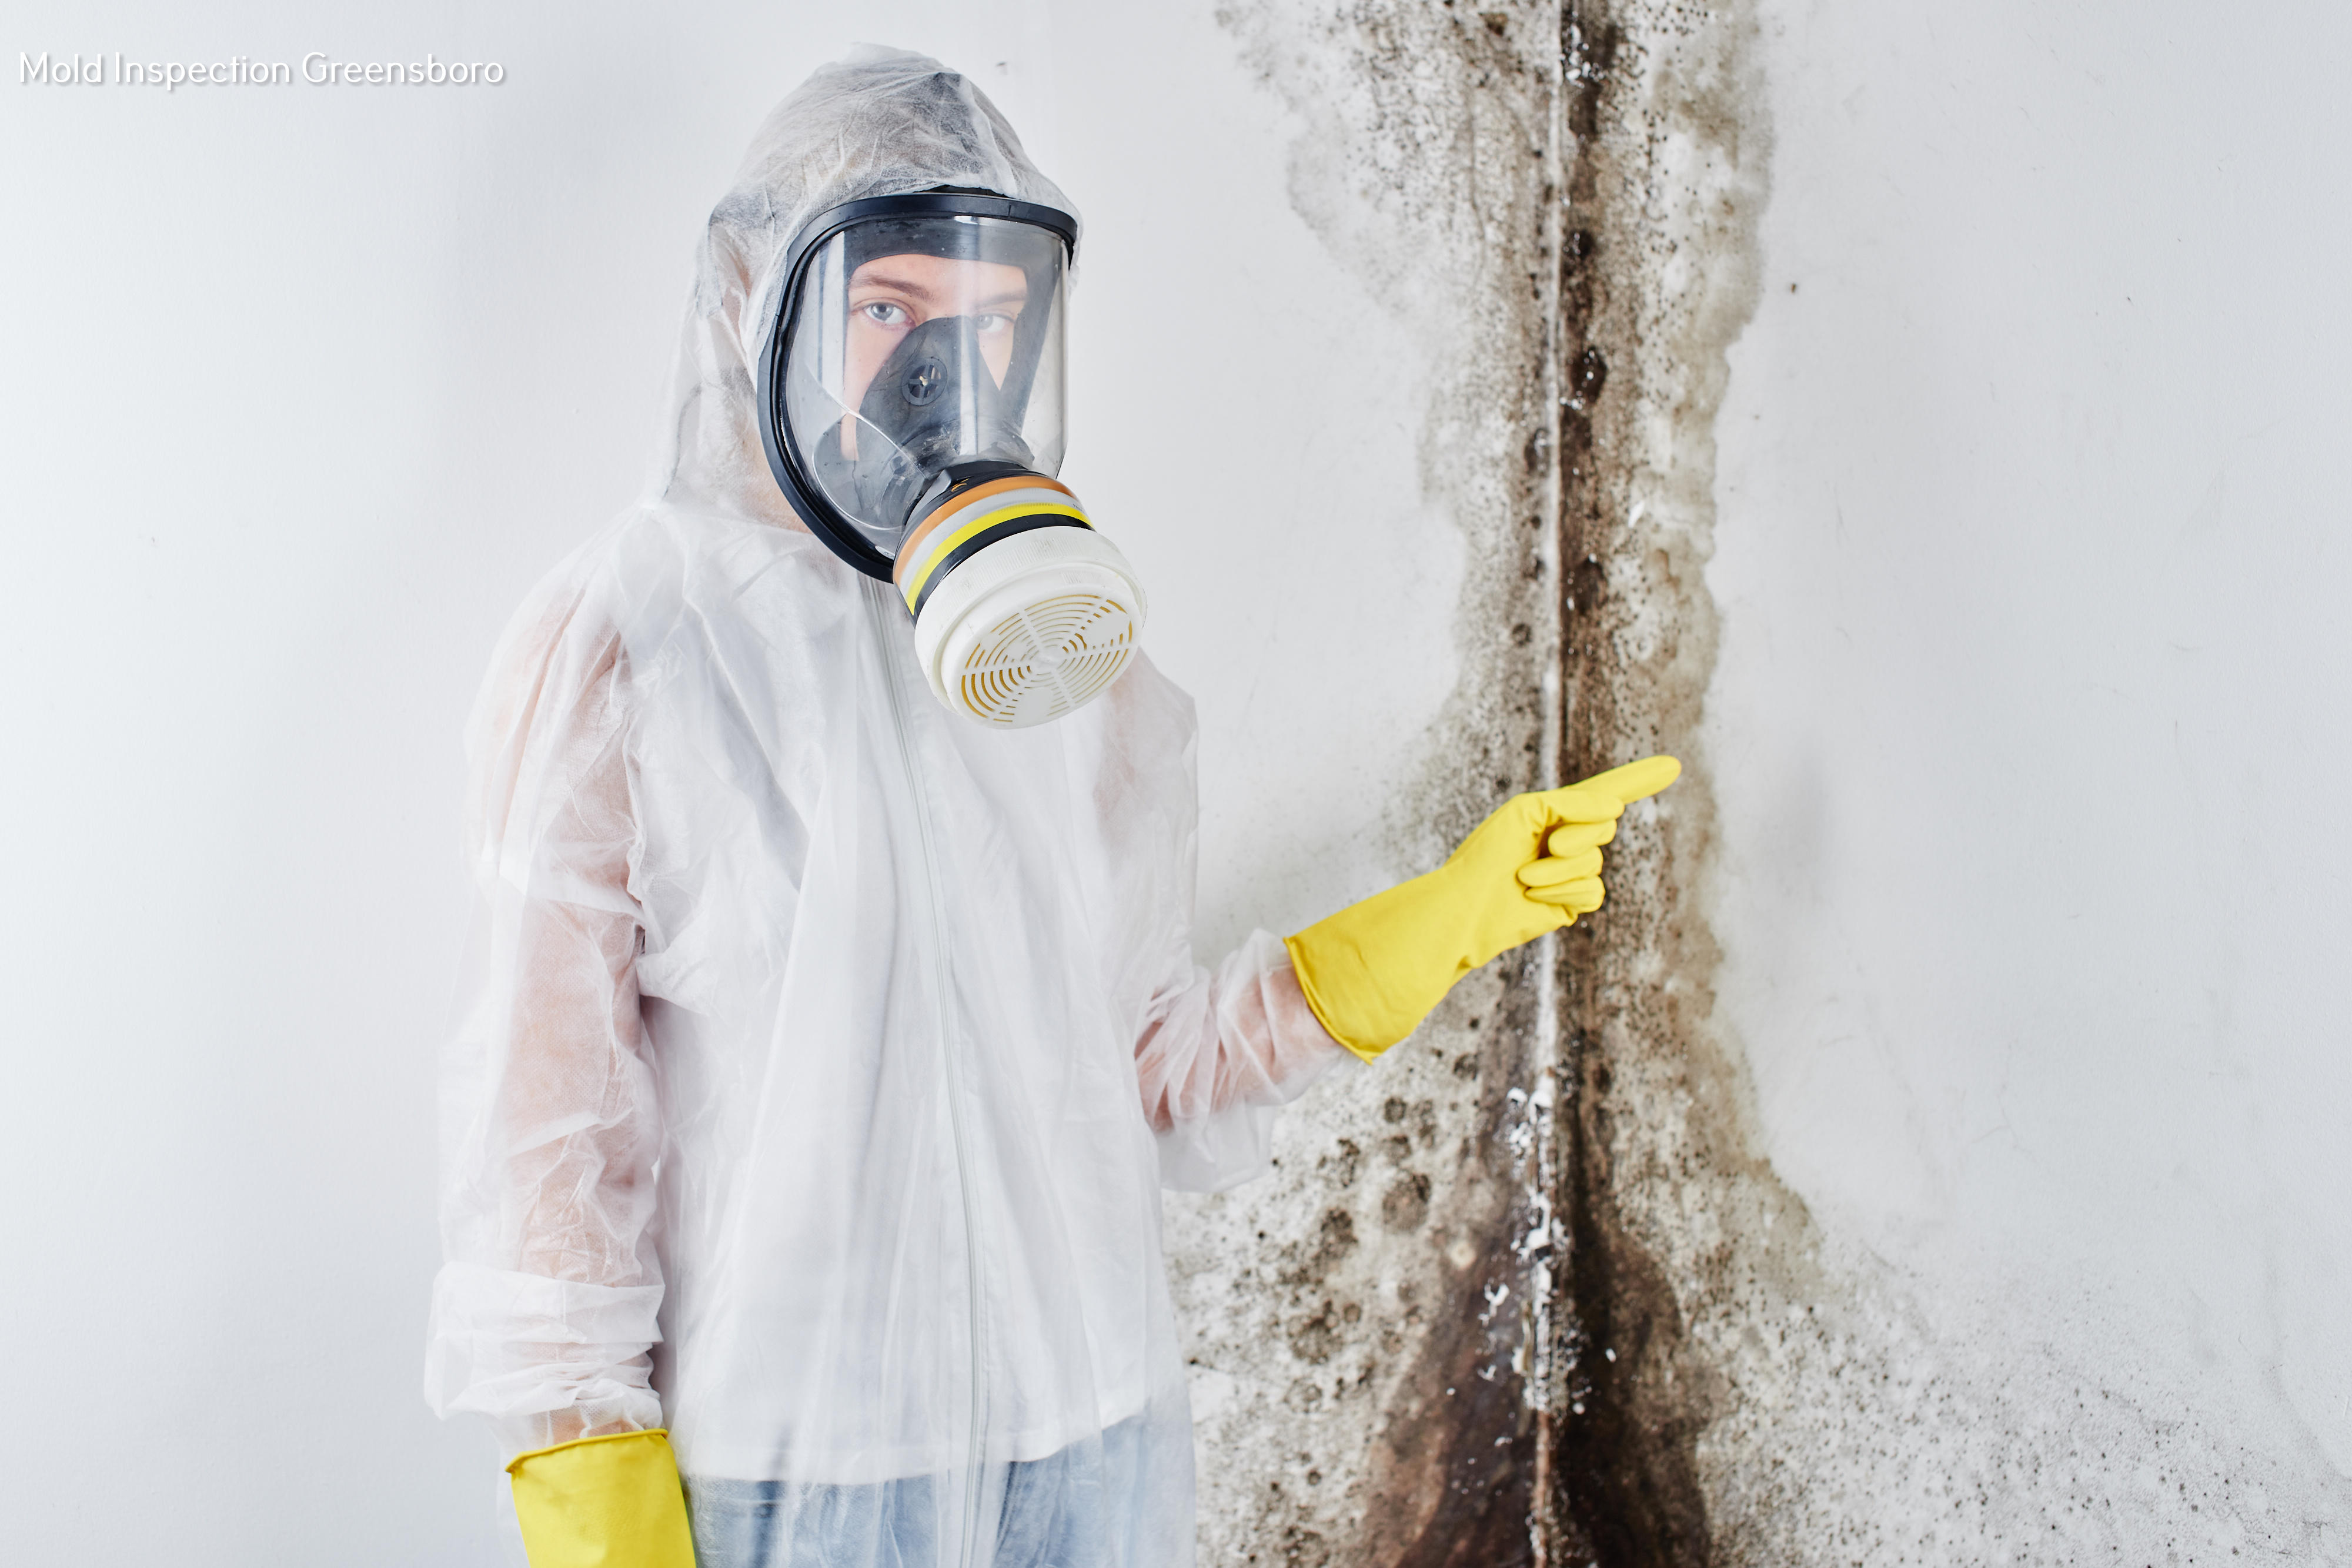 Hero Mold Company of Greensboro, NC Amplifies the Importance of Timely Mold Removal